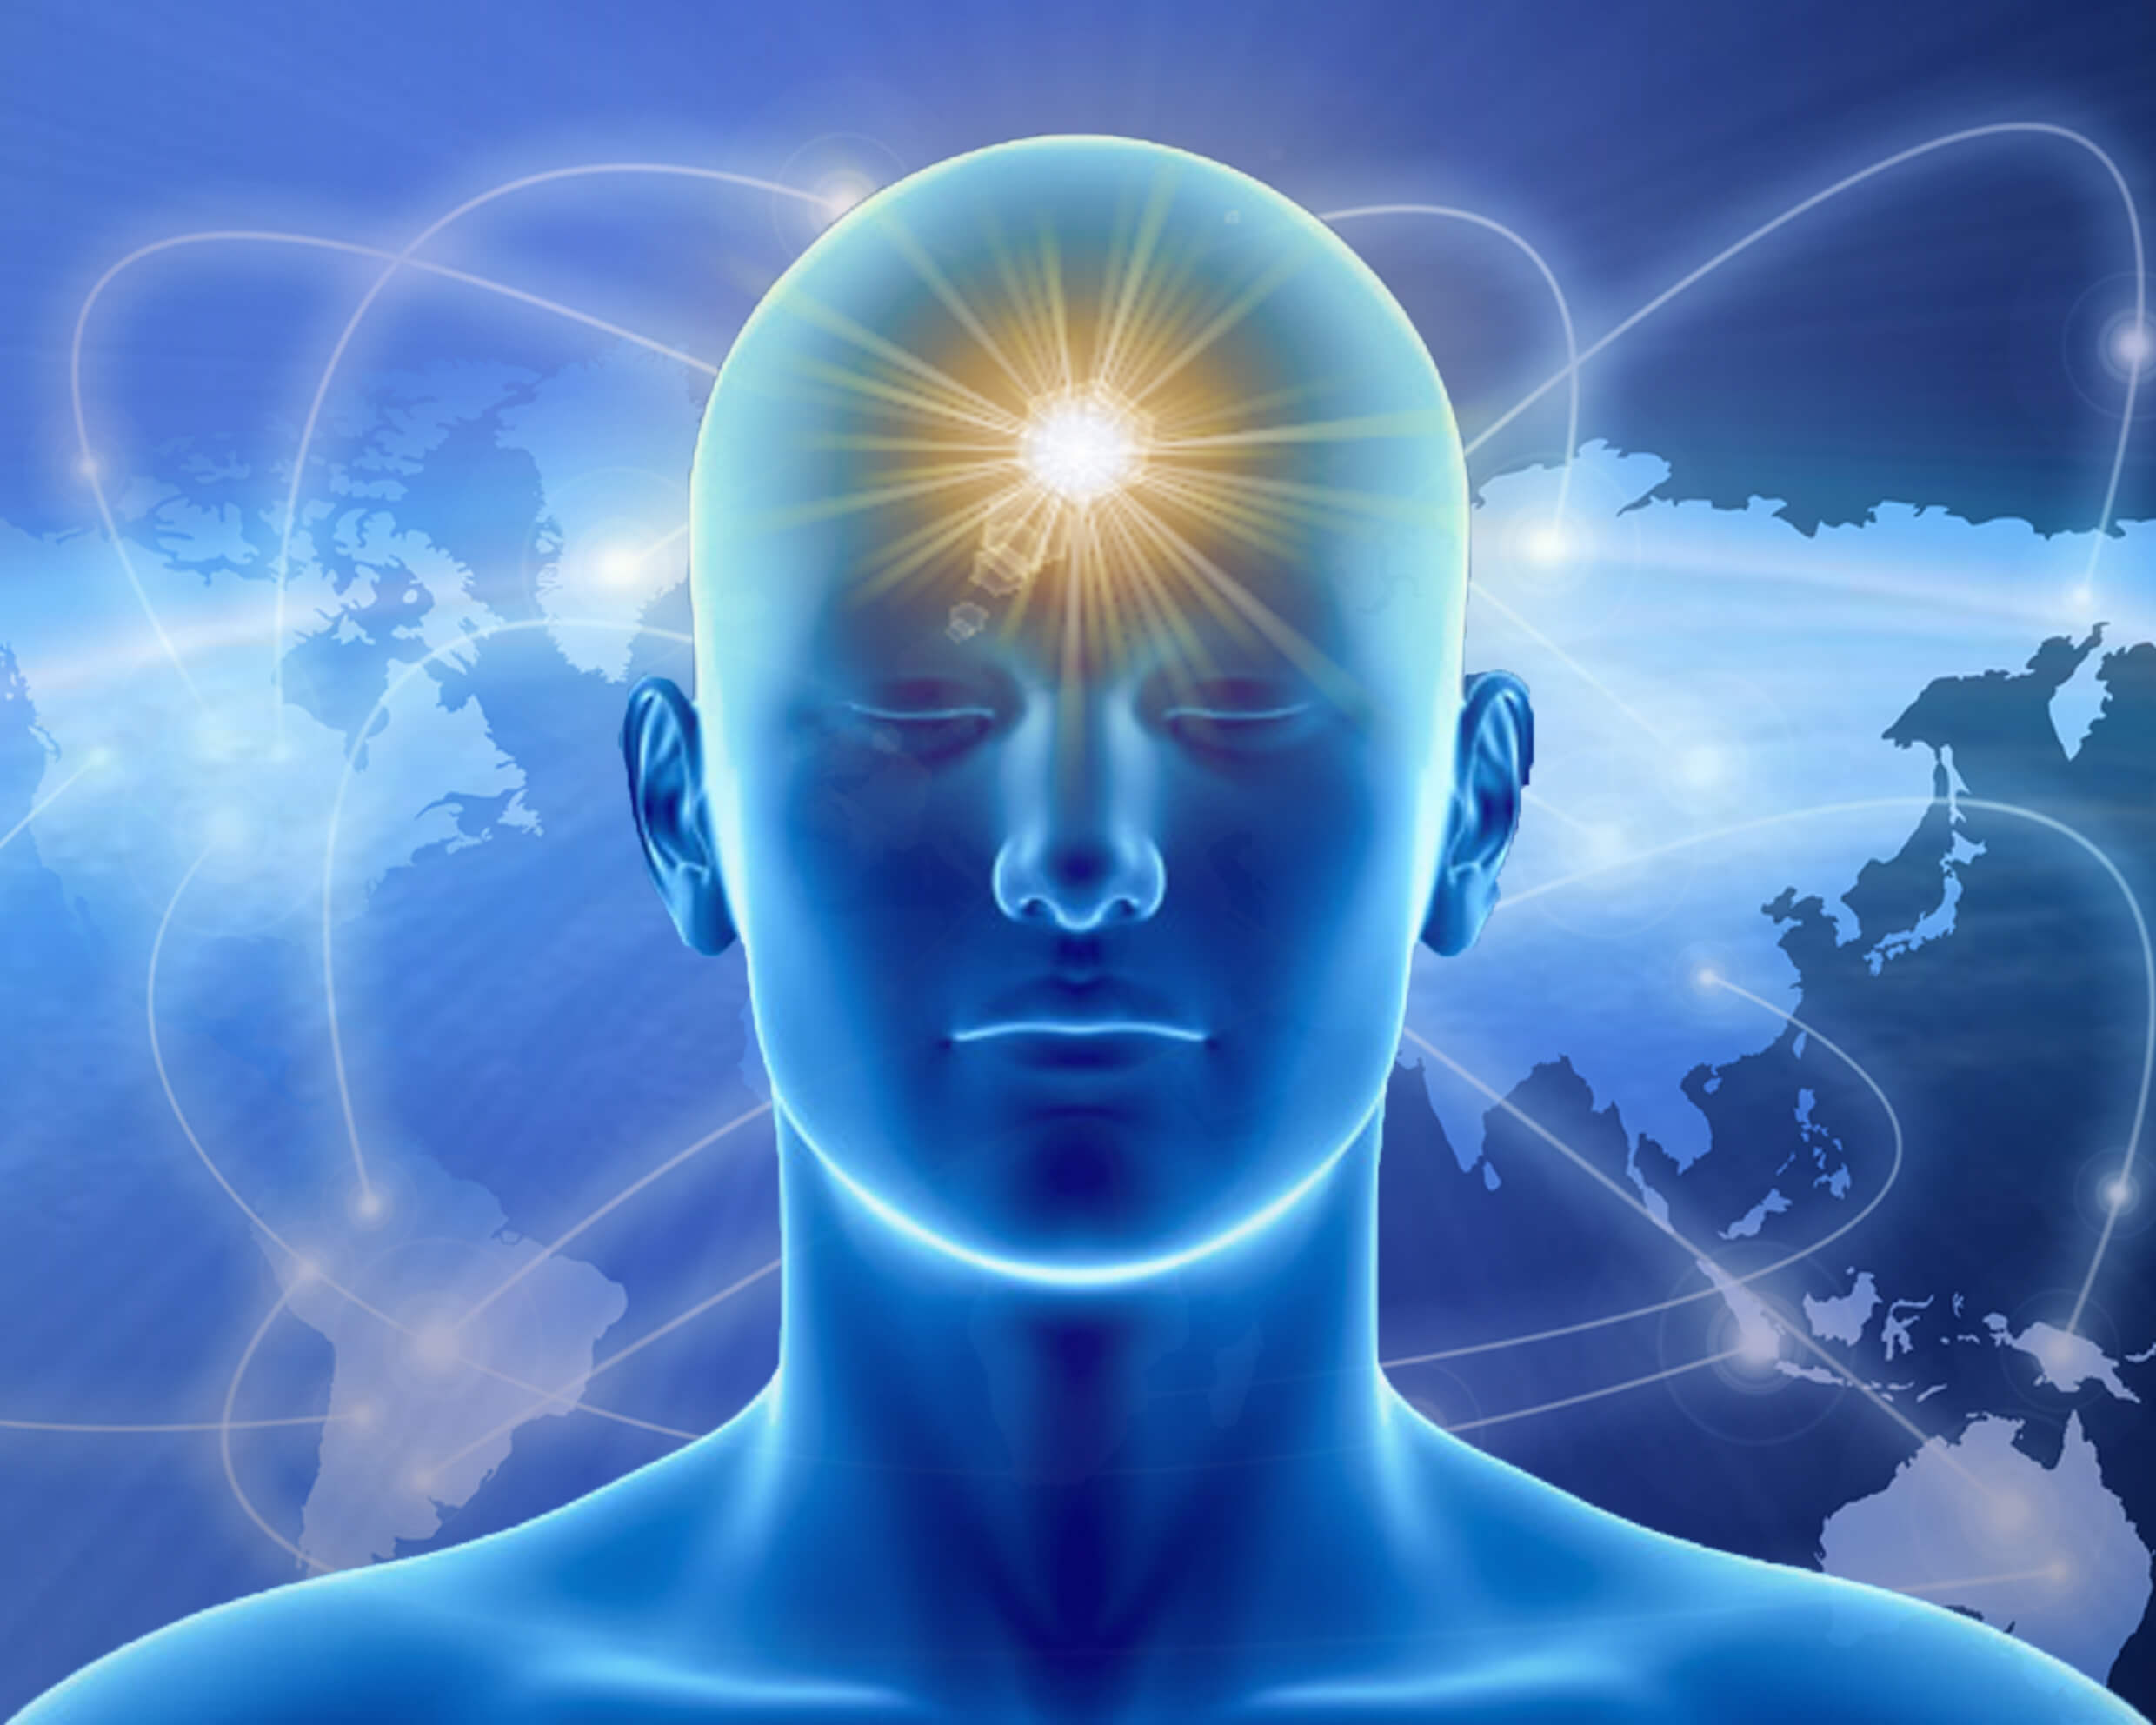 Human head with light coming from its forehead